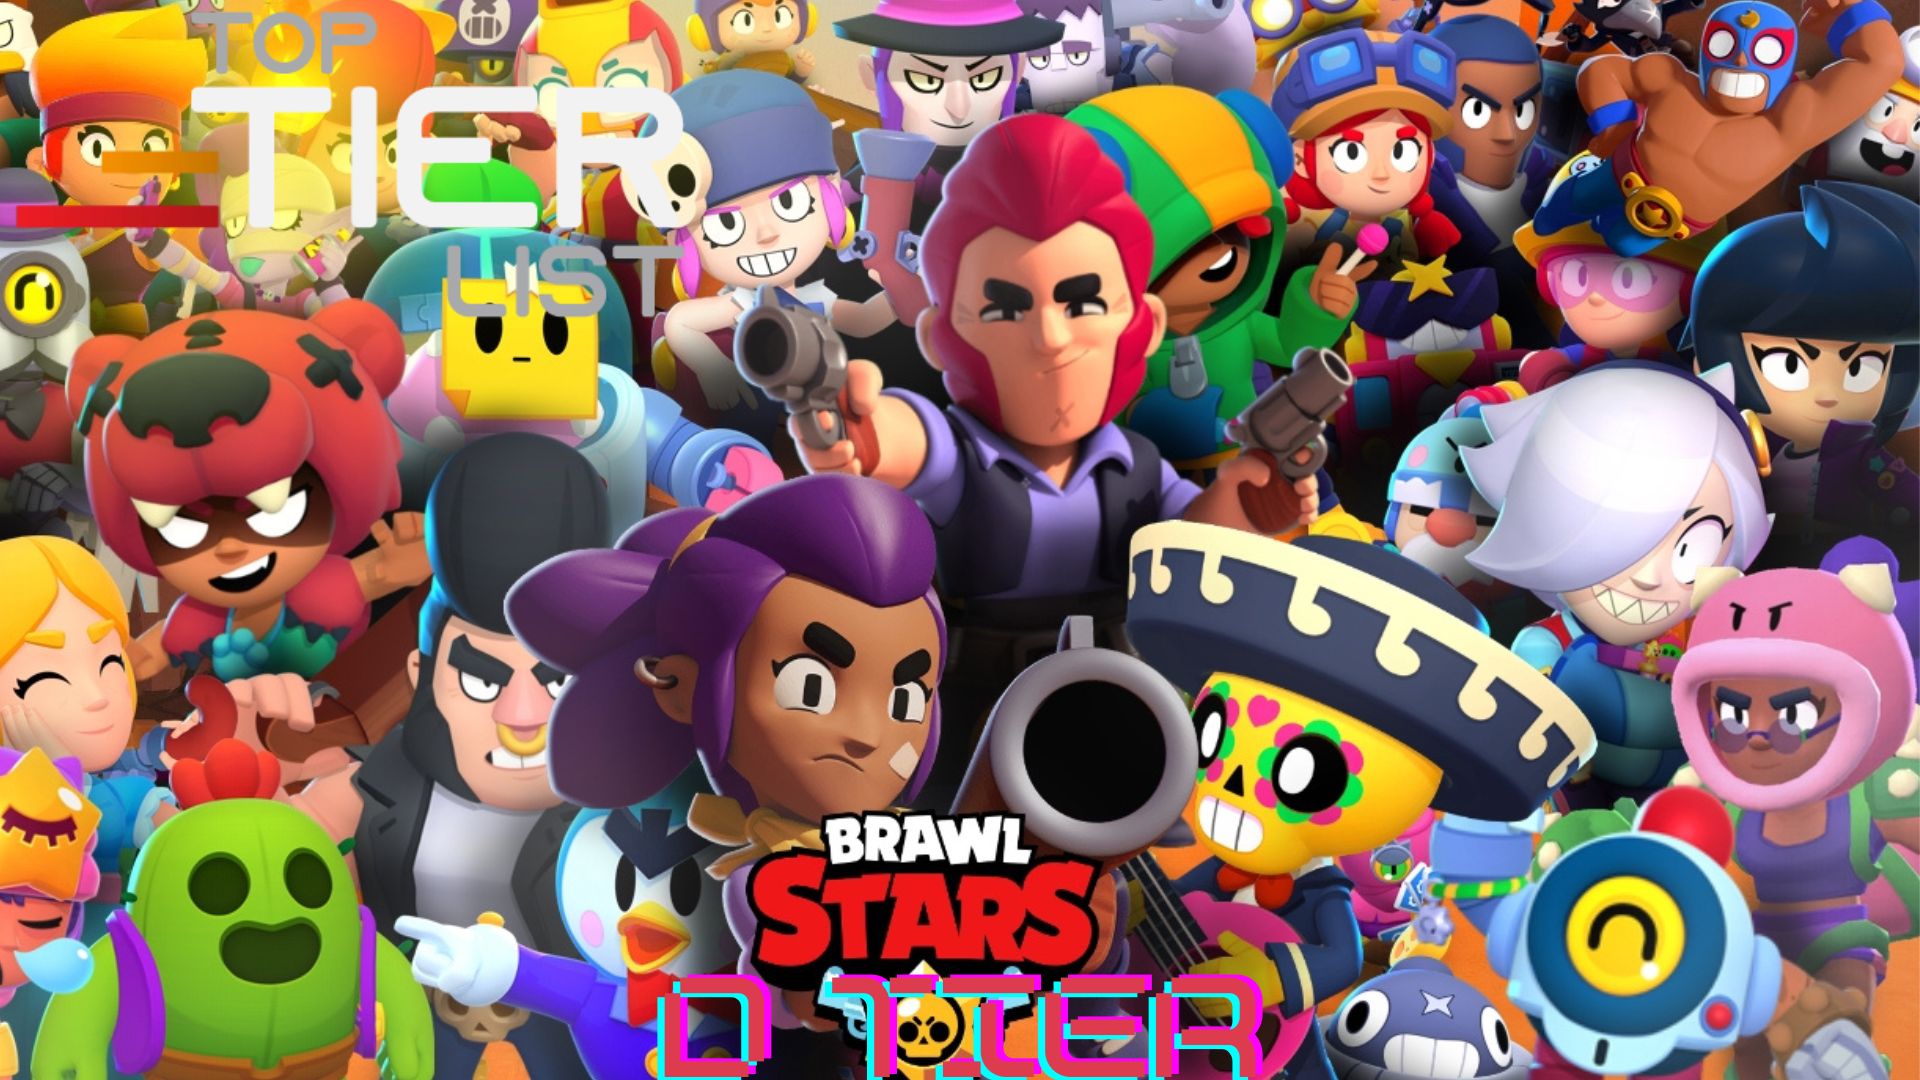 Worst brawlers of the game